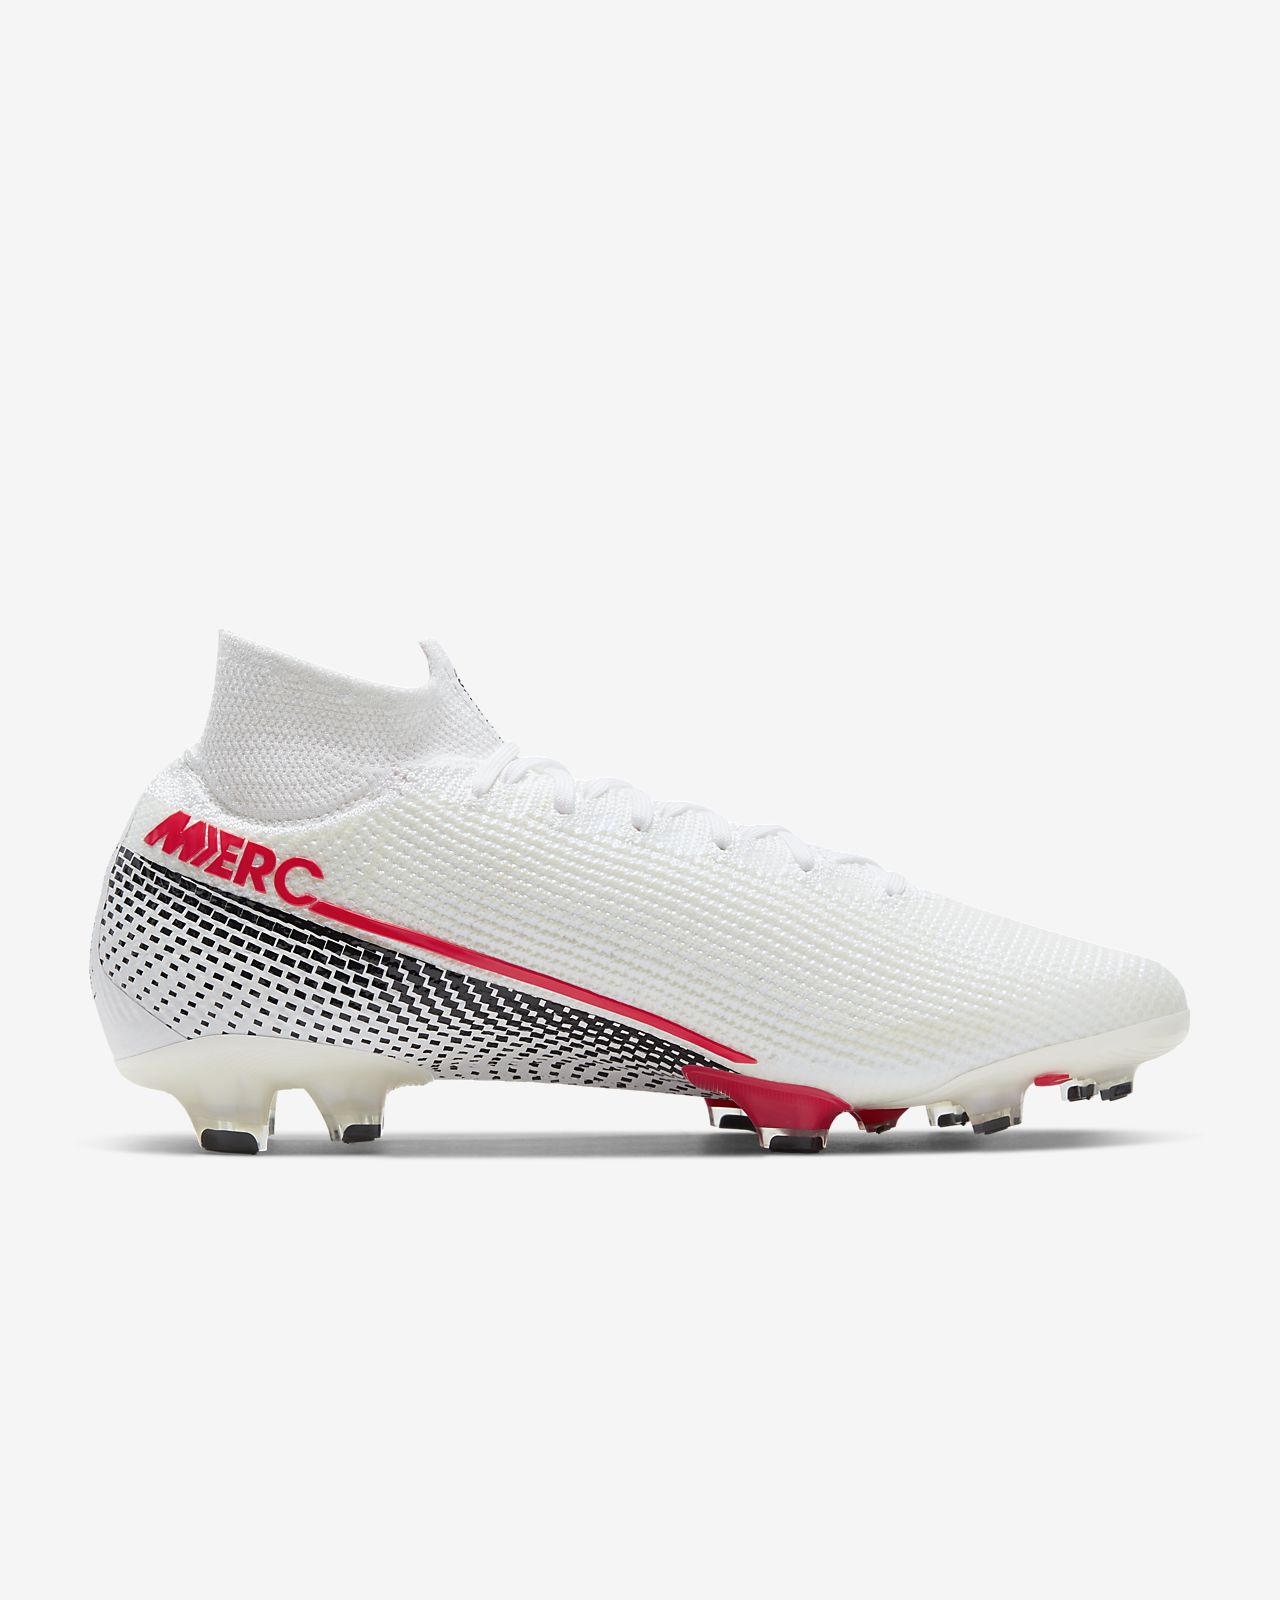 nike mercurial superfly 7 elite cr7 fg soccer cleat